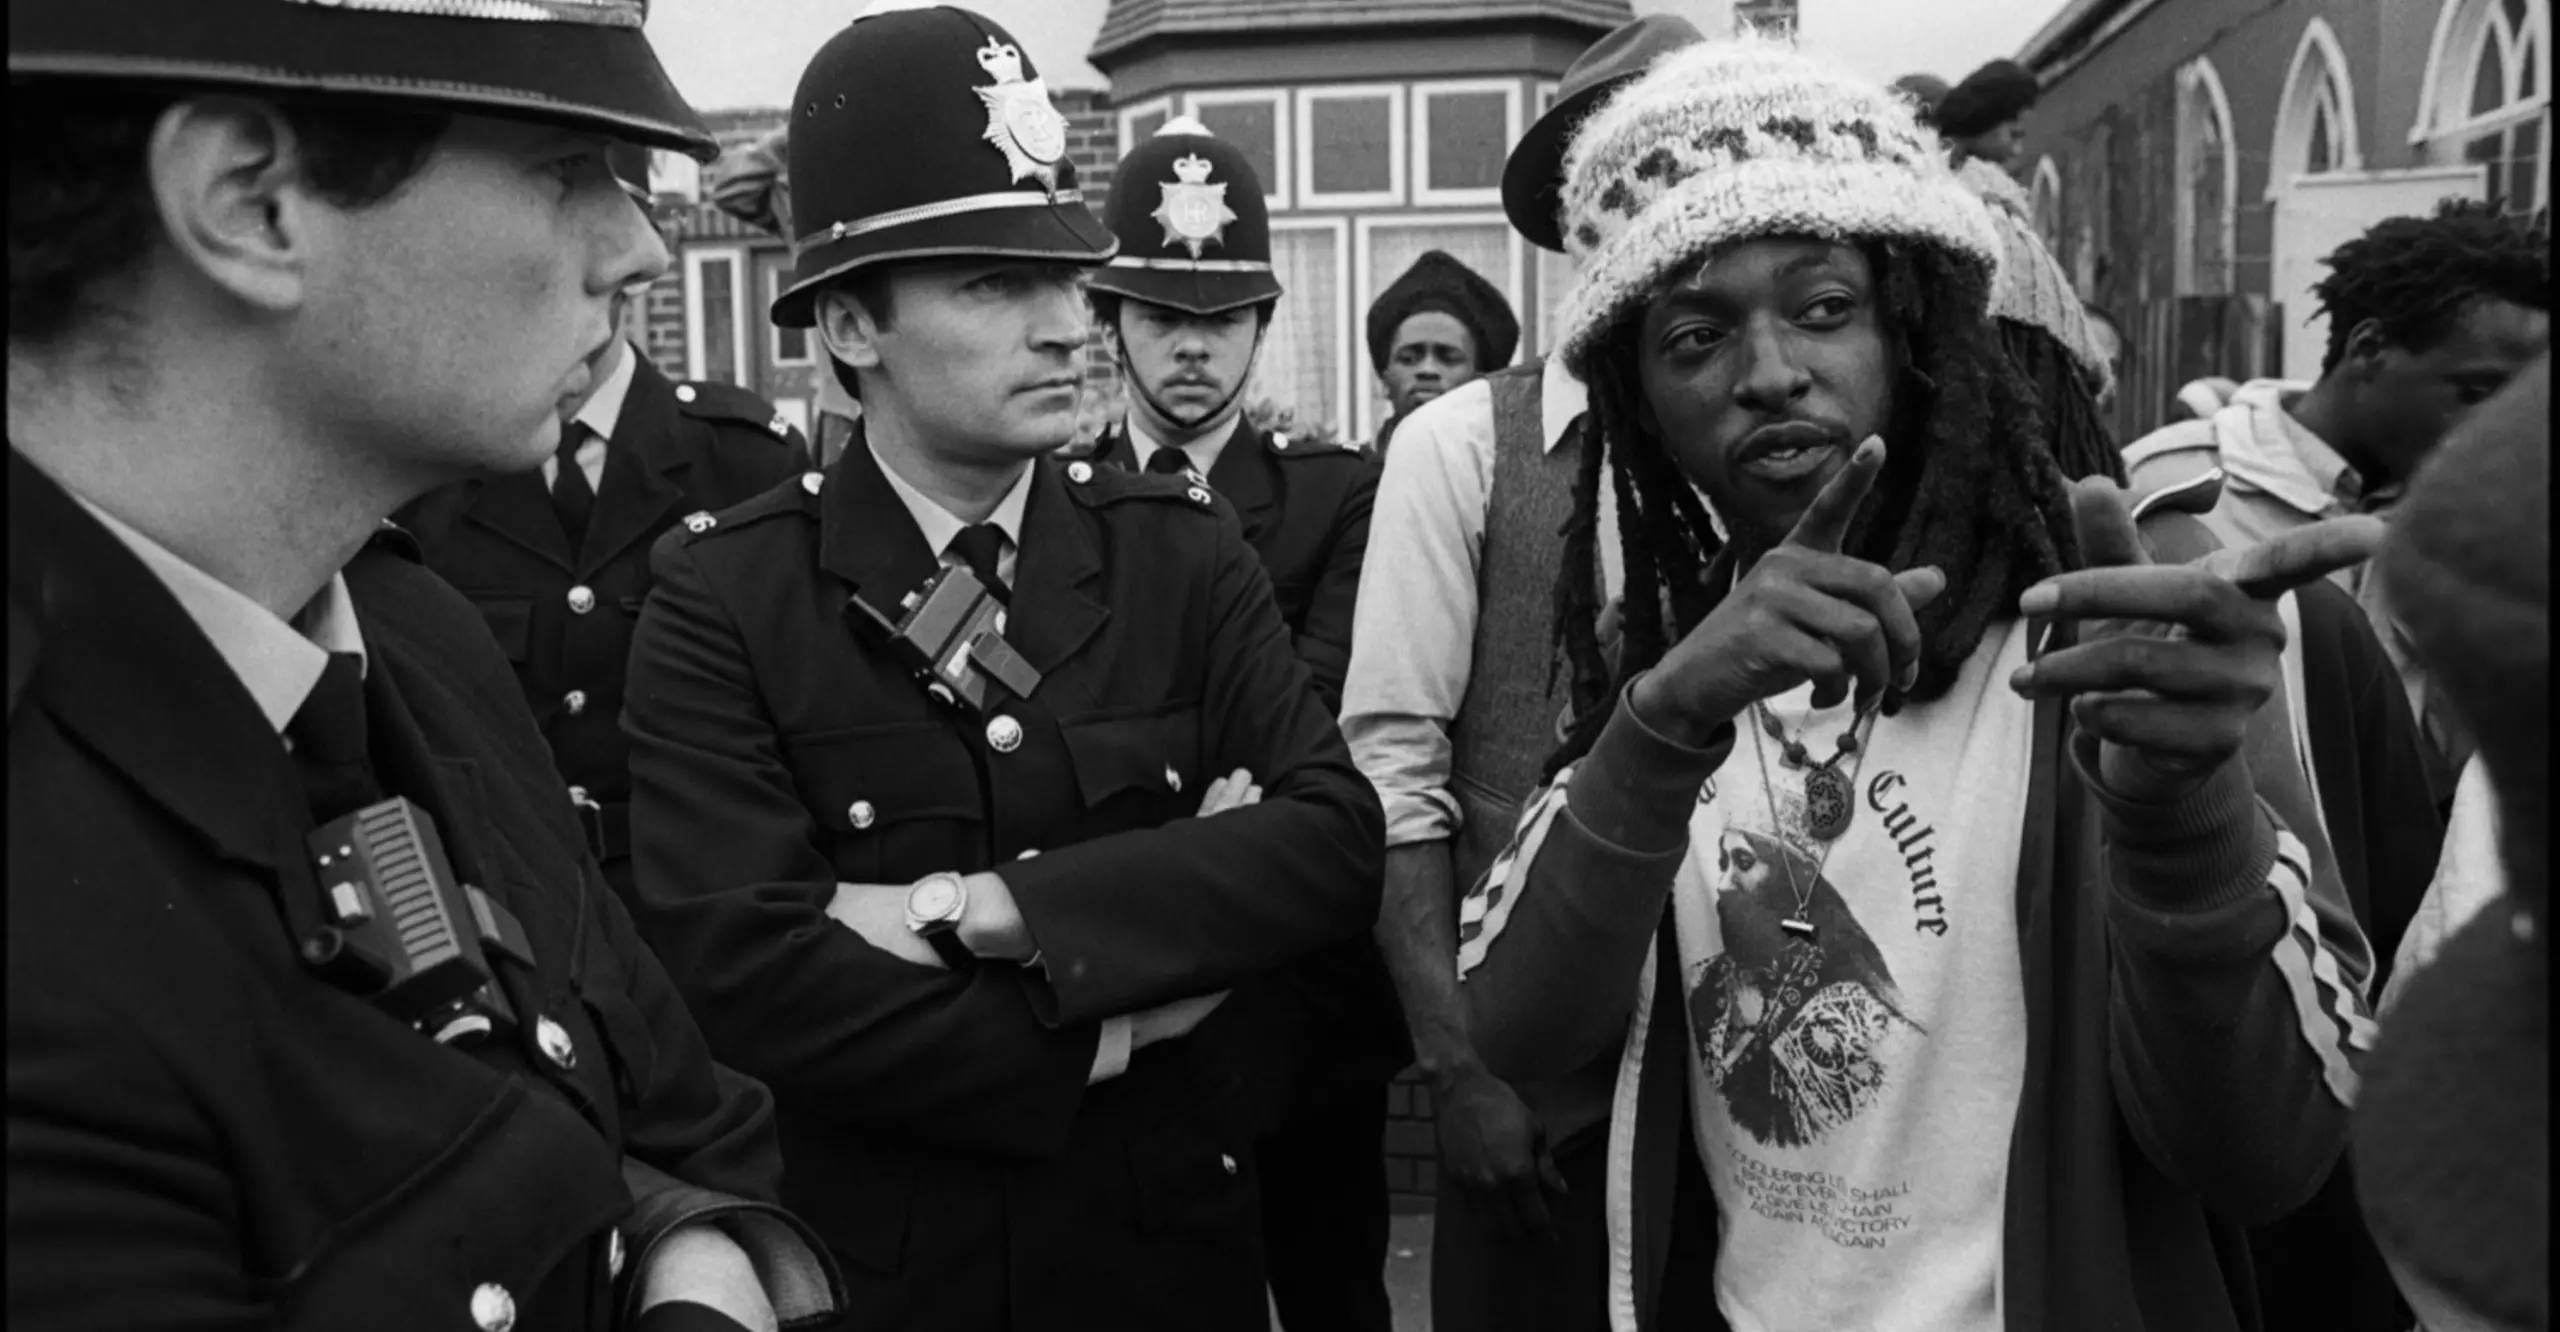 Rastafarian in discussion with police officers following a protest outside a church in Aston, Birmingham 1982 © Derek Bishton